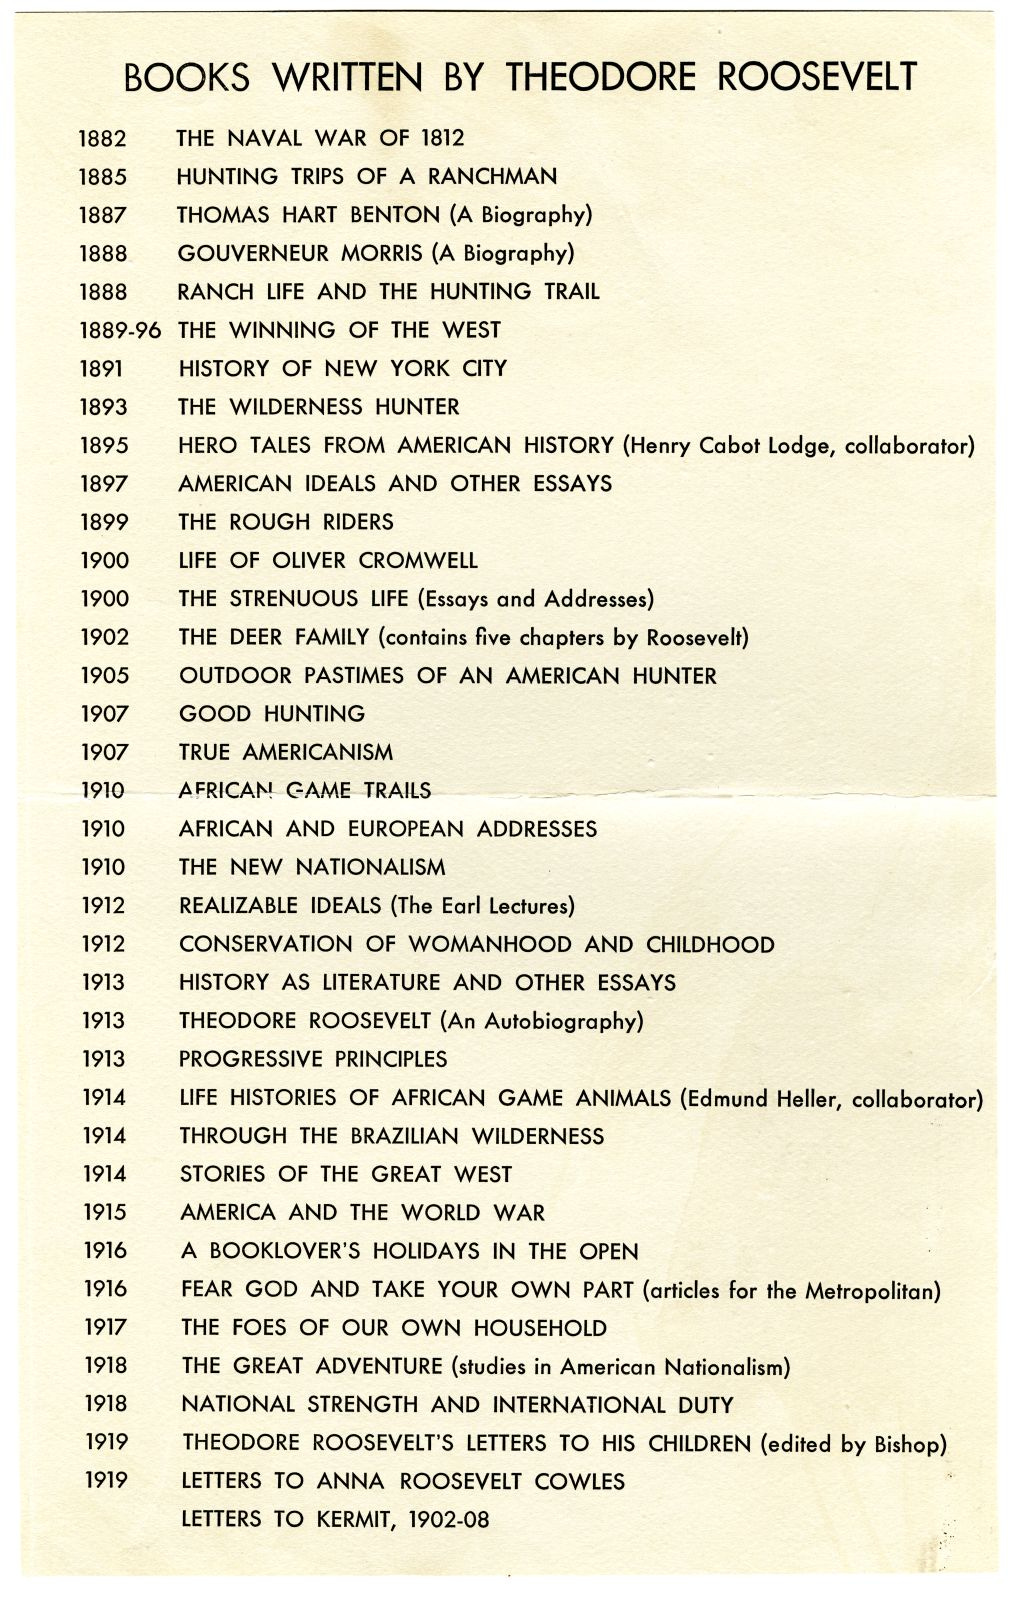 A list of books written by Theodore Roosevelt